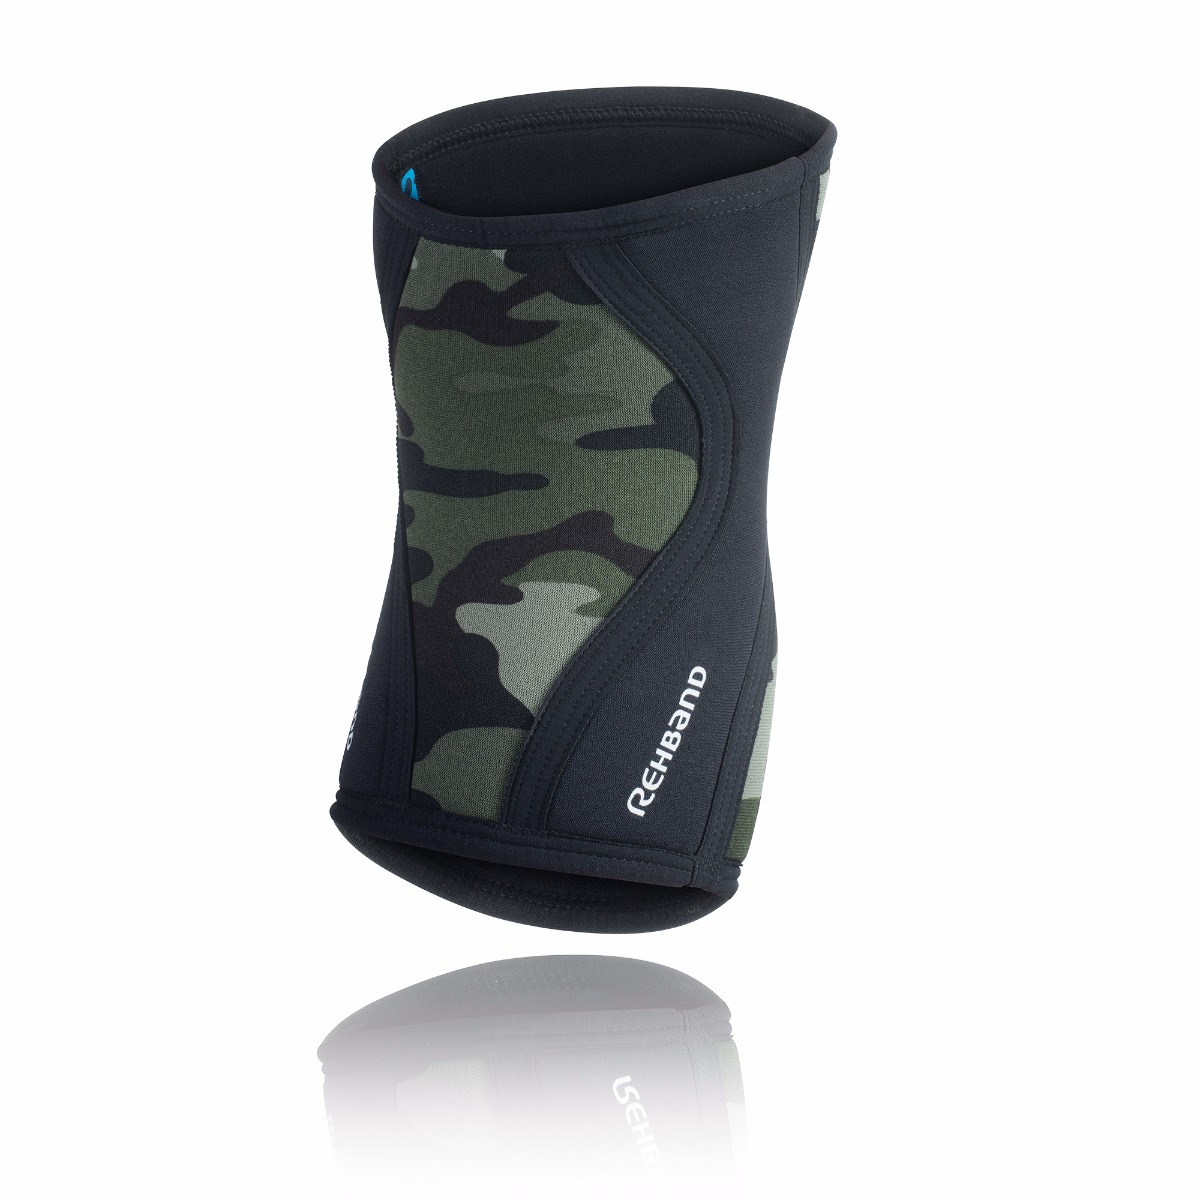 Rehband Rx Knee Support